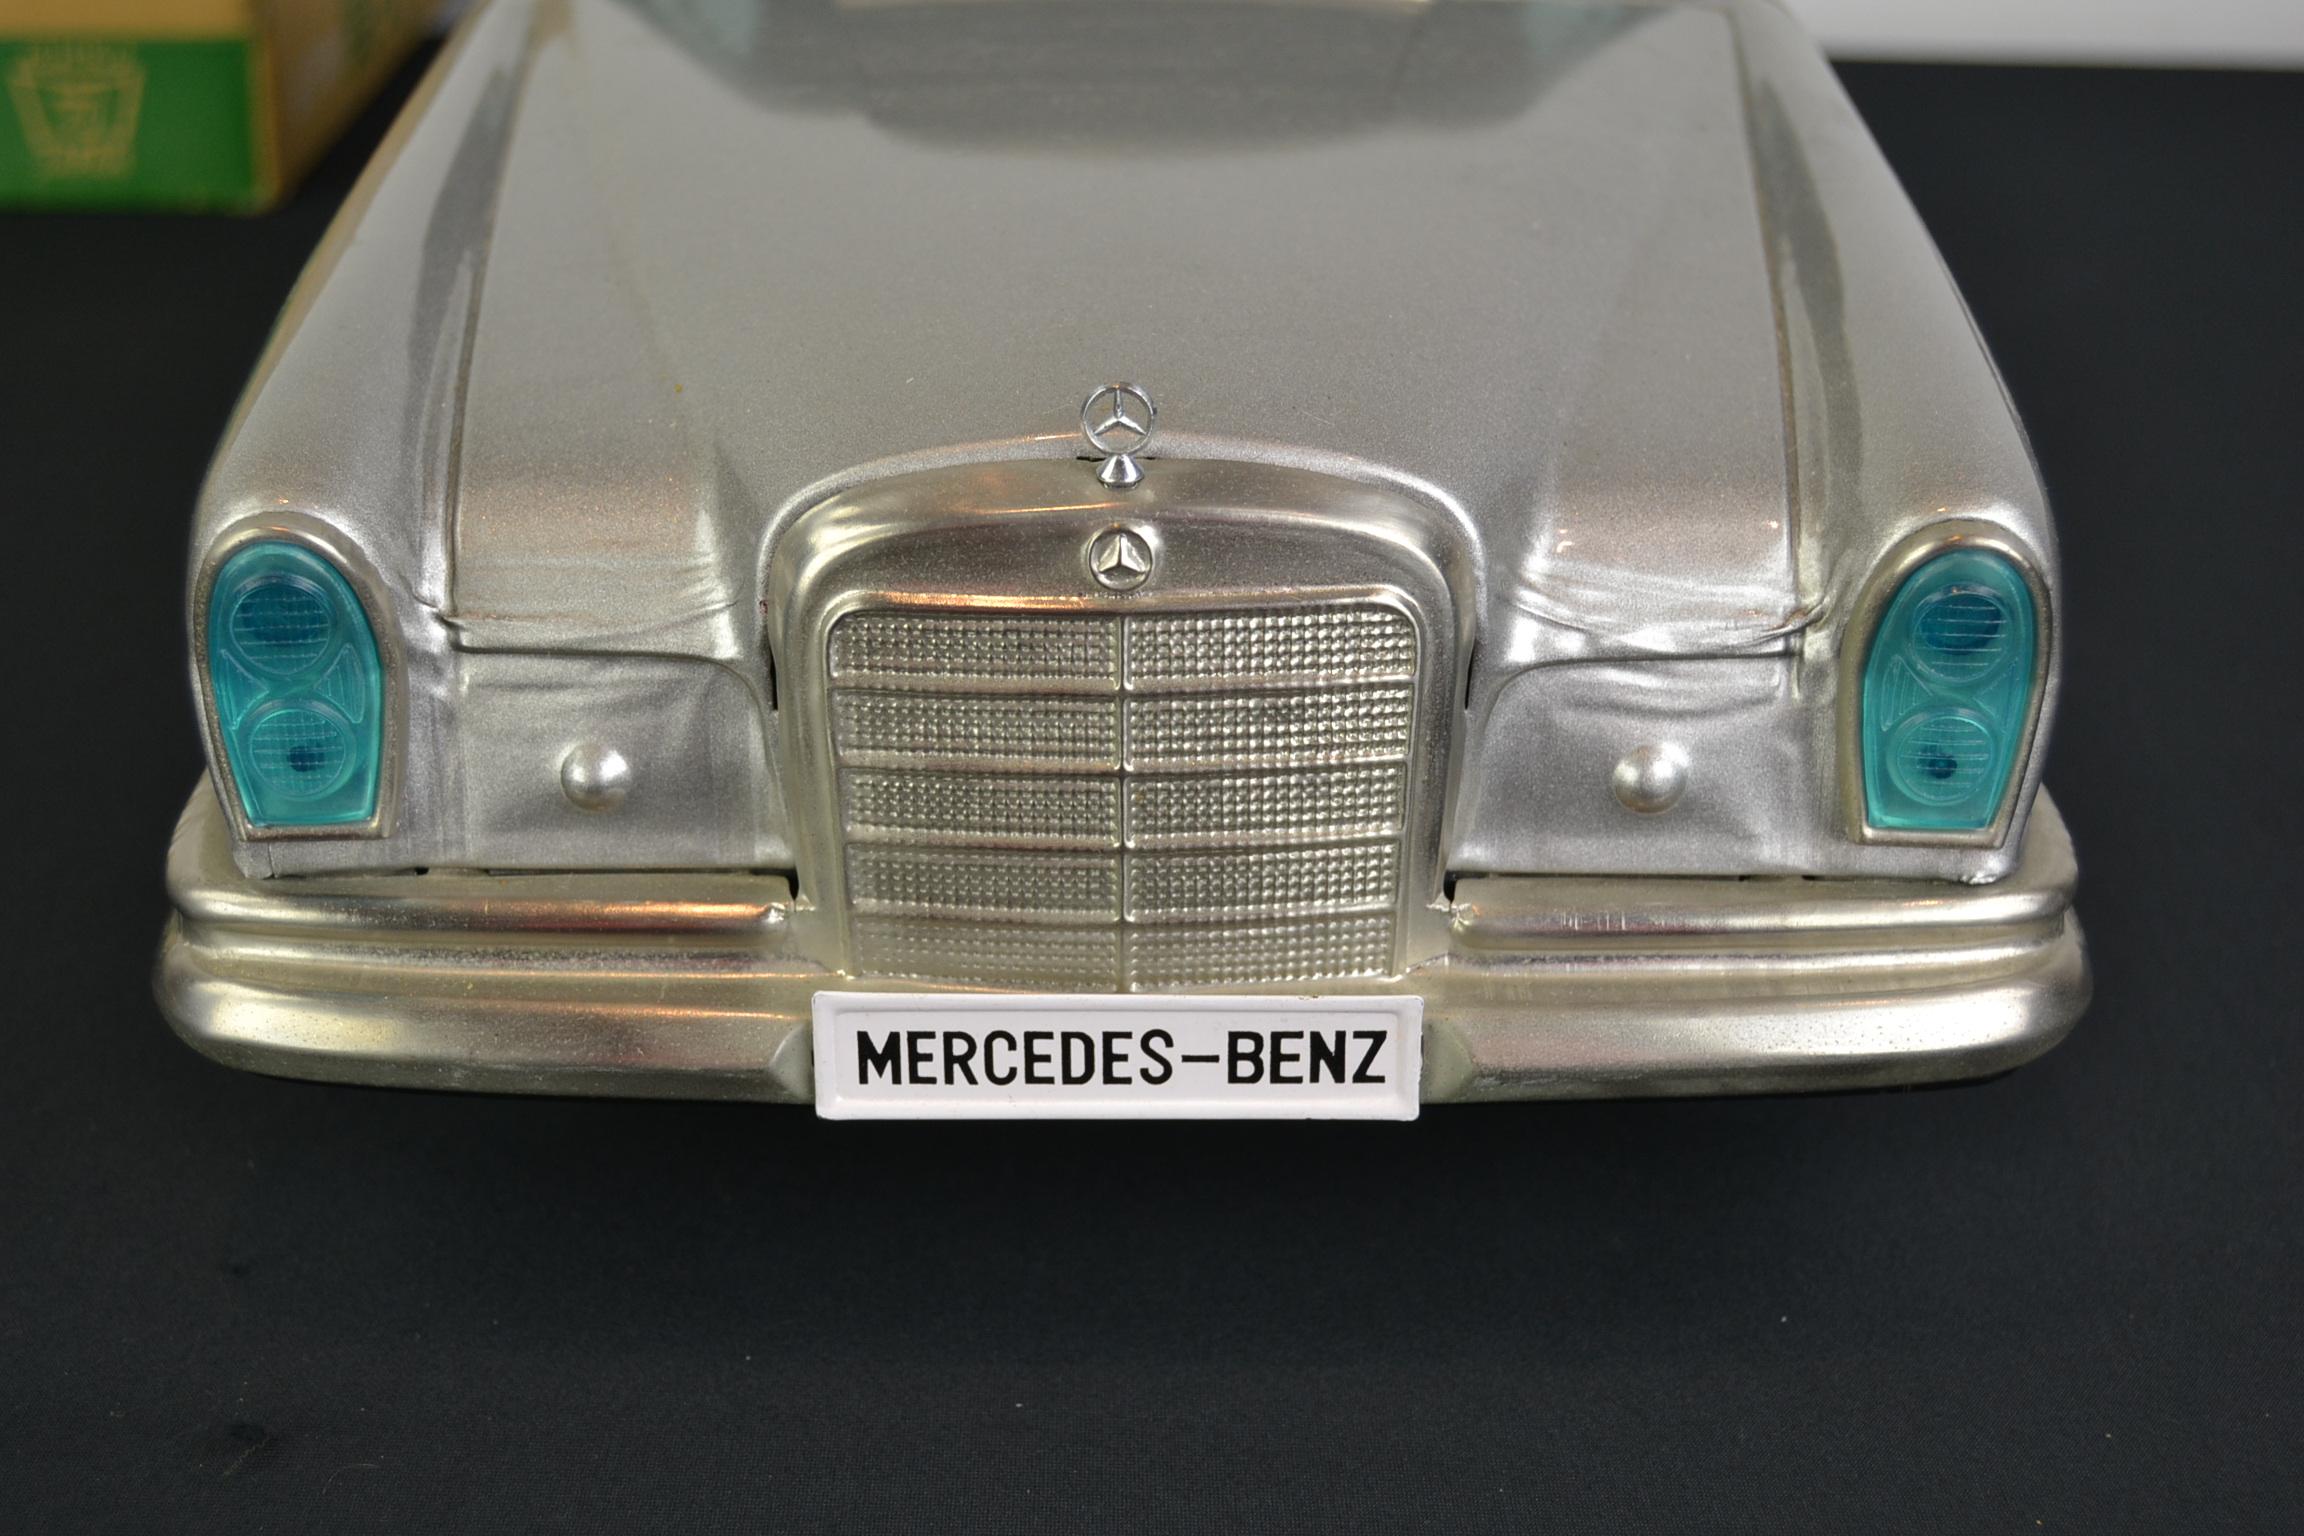 Boxed Mercedes Benz 300 SE Toy Model by Ichiko Japan, 1980s 5